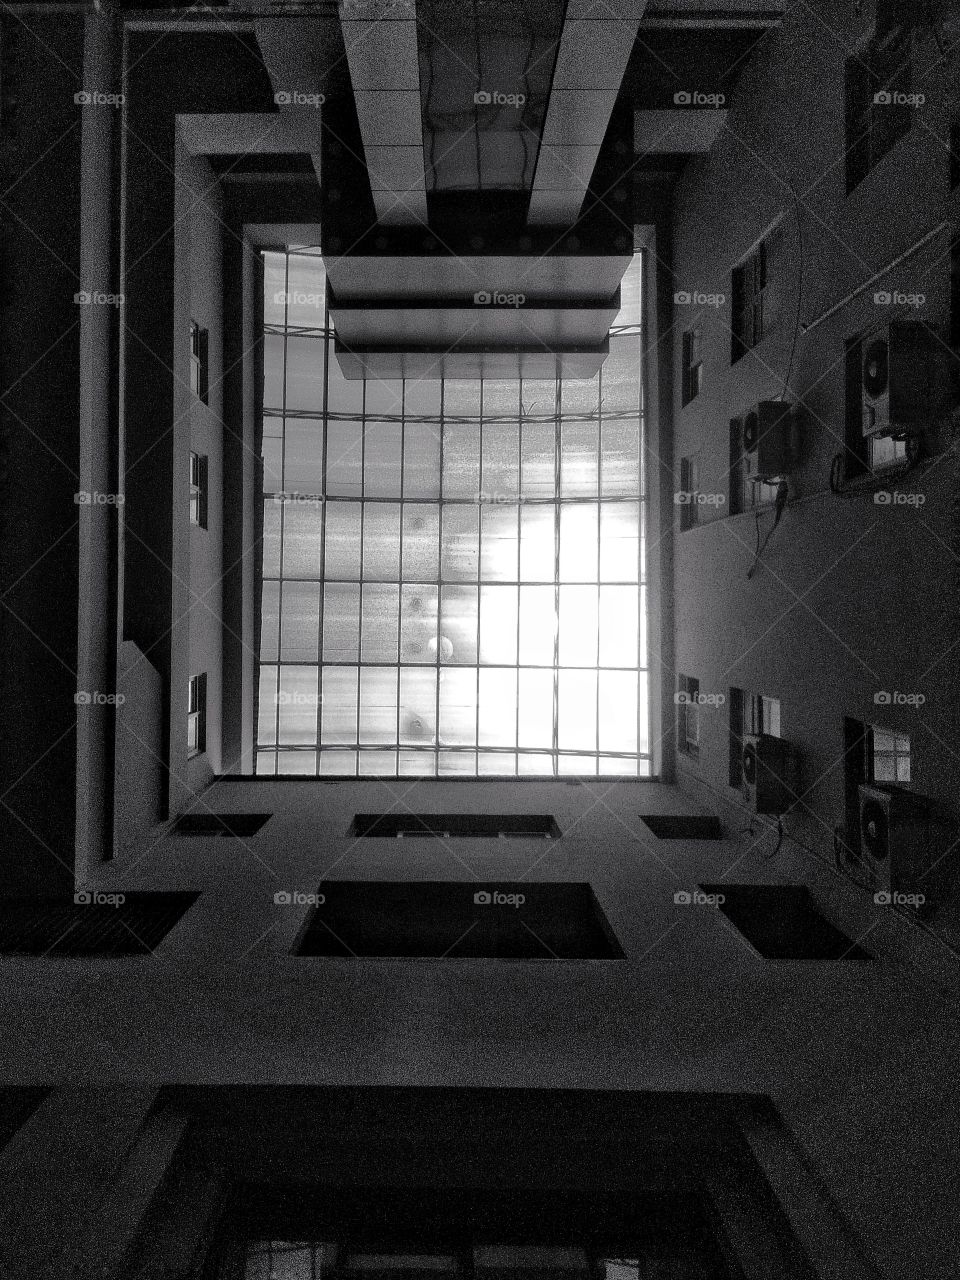 faculty building in black and white